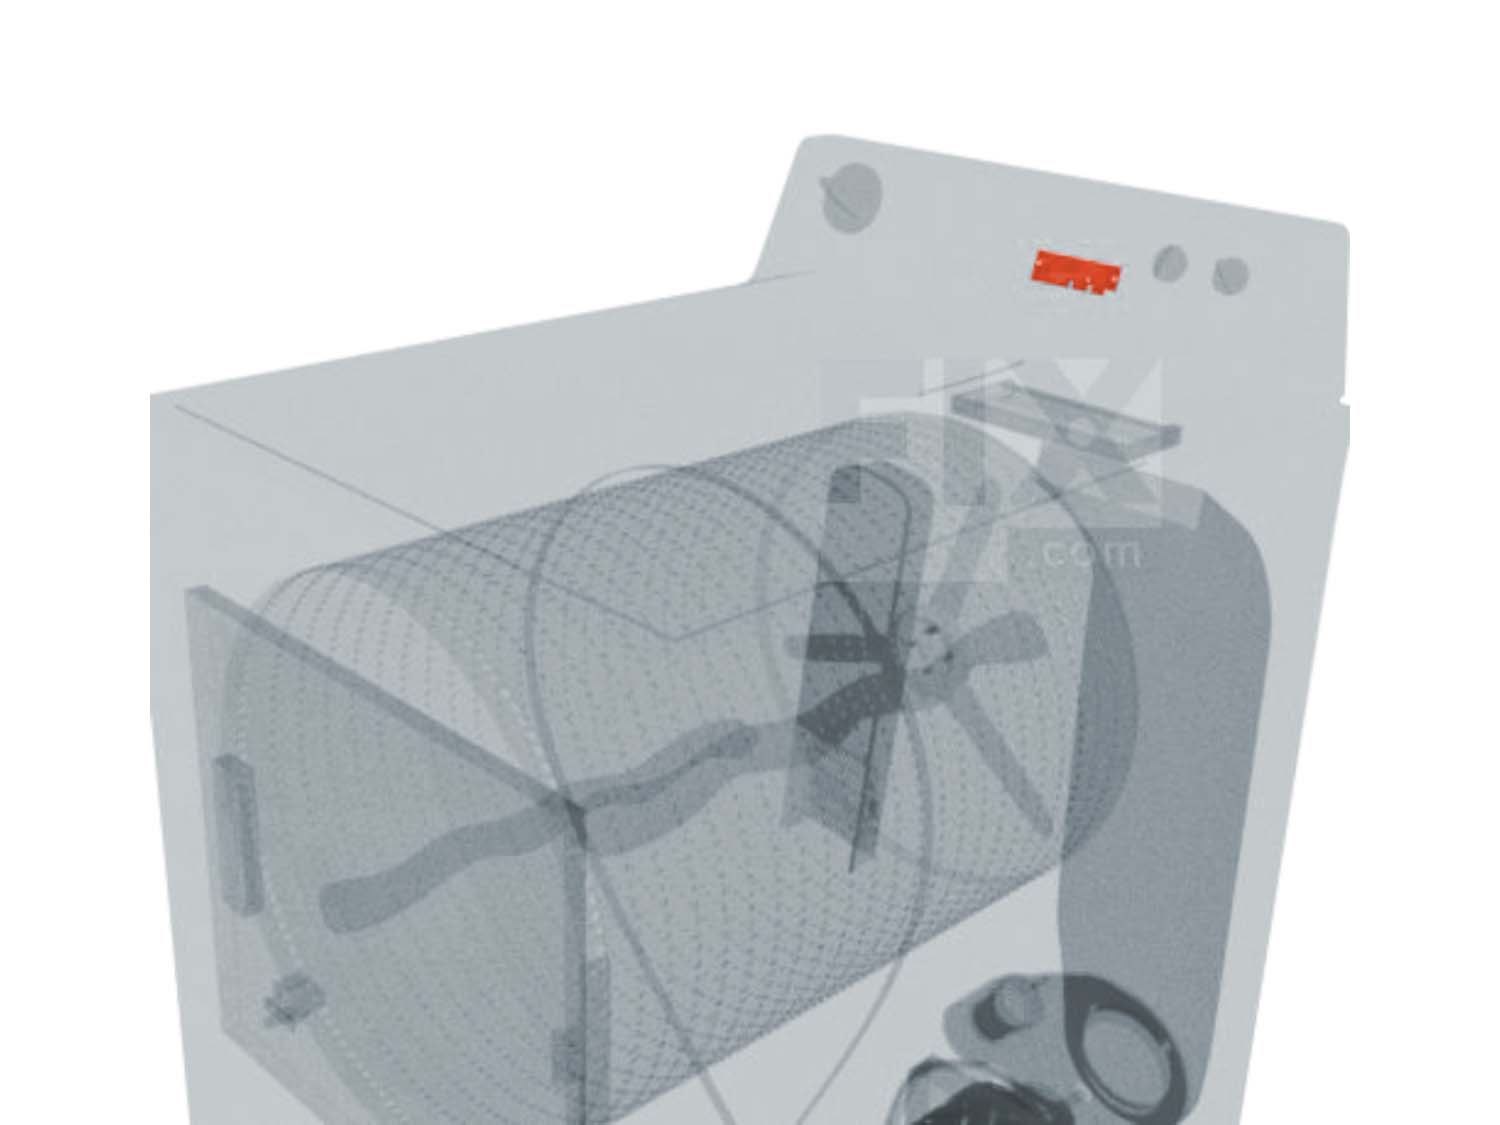 A 3D diagram showing the components of a dryer and specifying the location of the moisture board